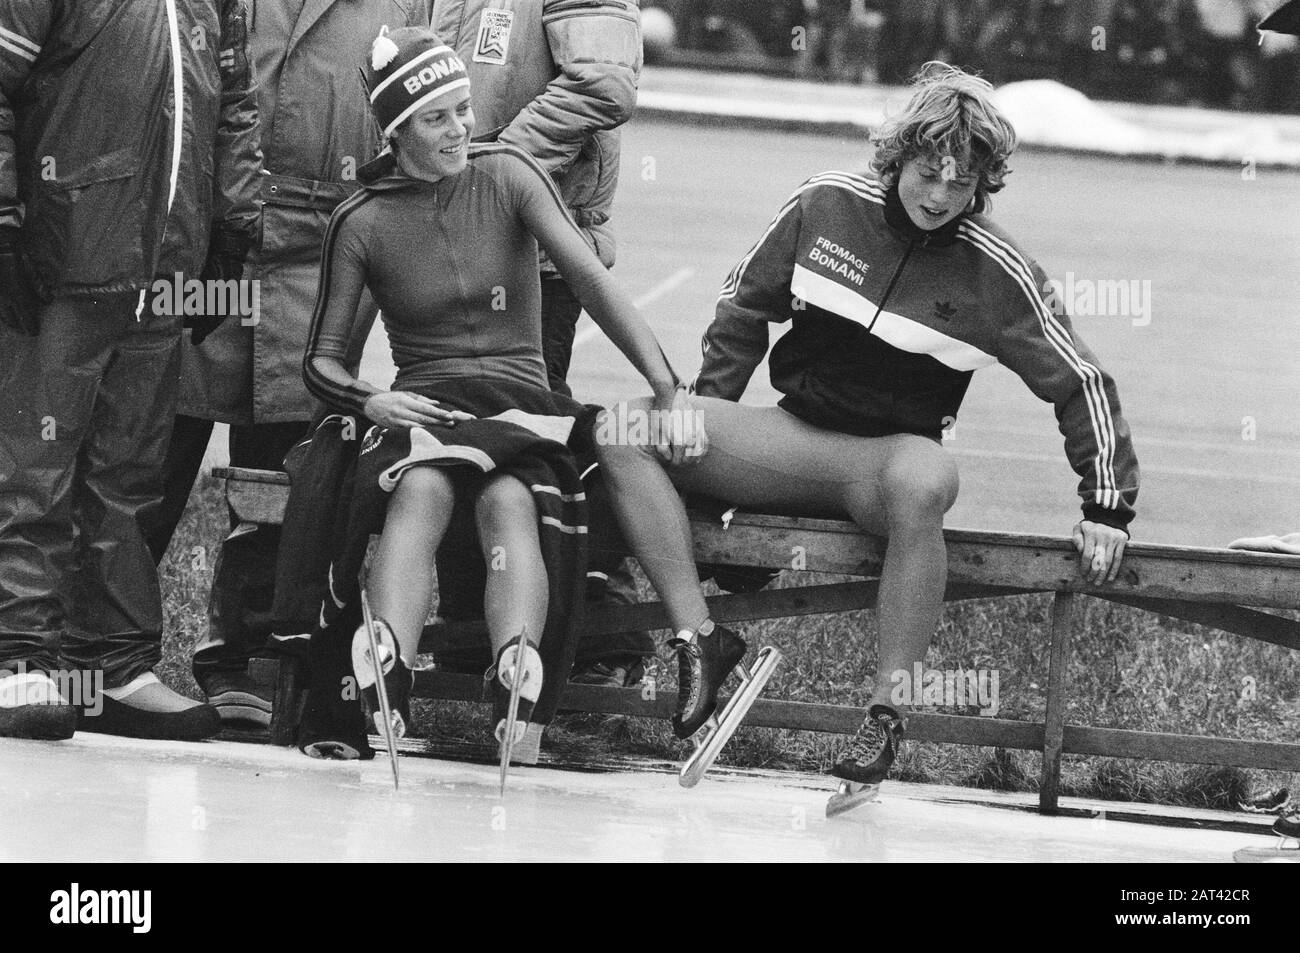 Dutch championships all-round women in Deventer  Ina Steenbruggen (l) and Ria Visser after the 5 km sitting on a bench Date: 9 January 1983 Location: Deventer, Overijssel Keywords: skating, skating competitions, sports Person name: Ina Steenbruggen, Fisherman, Ria Stock Photo